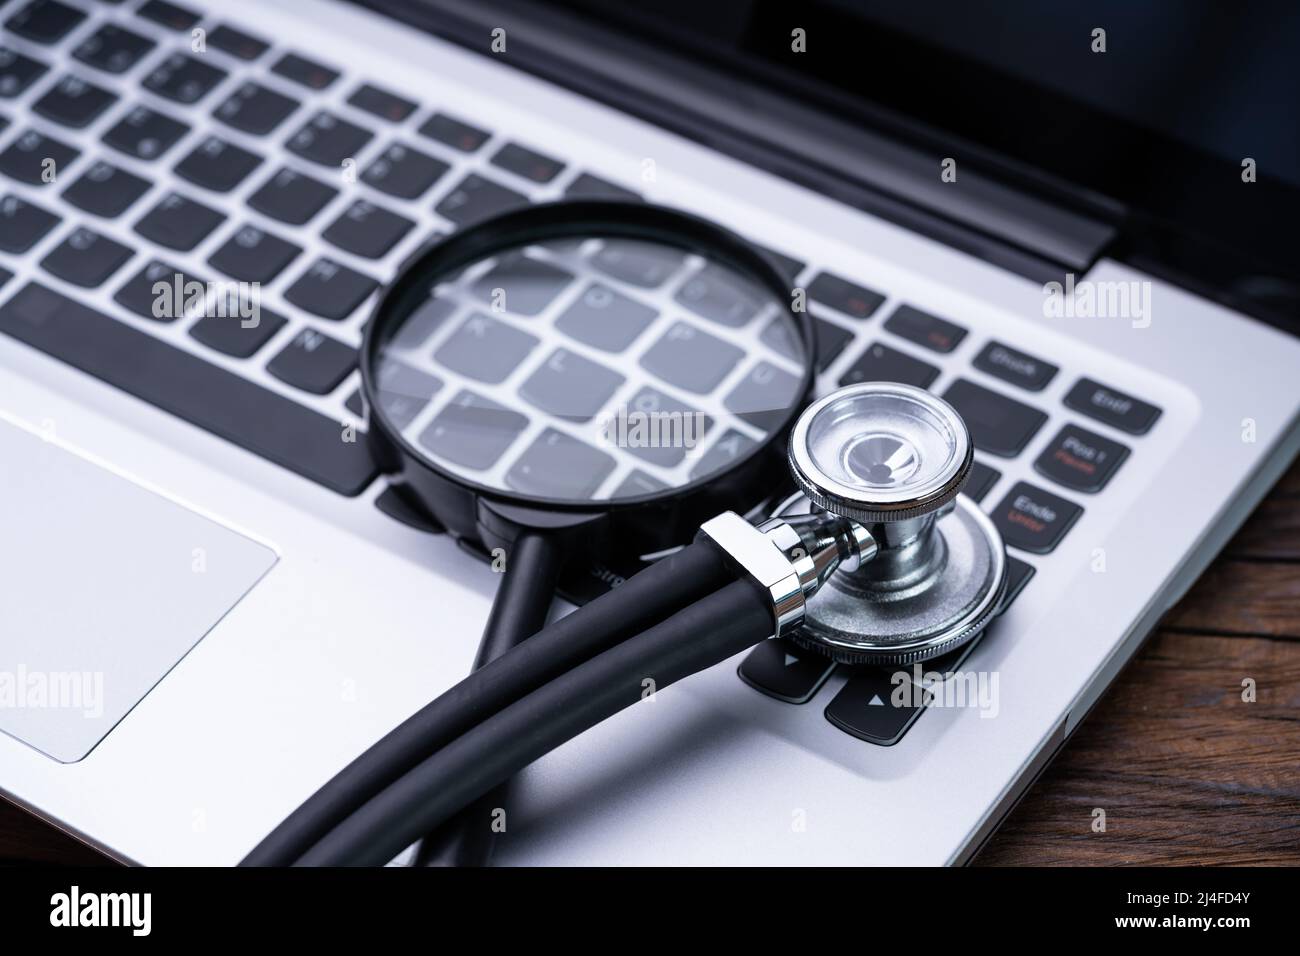 Medical Health Check Diagnose And Business Software Programs Stock Photo